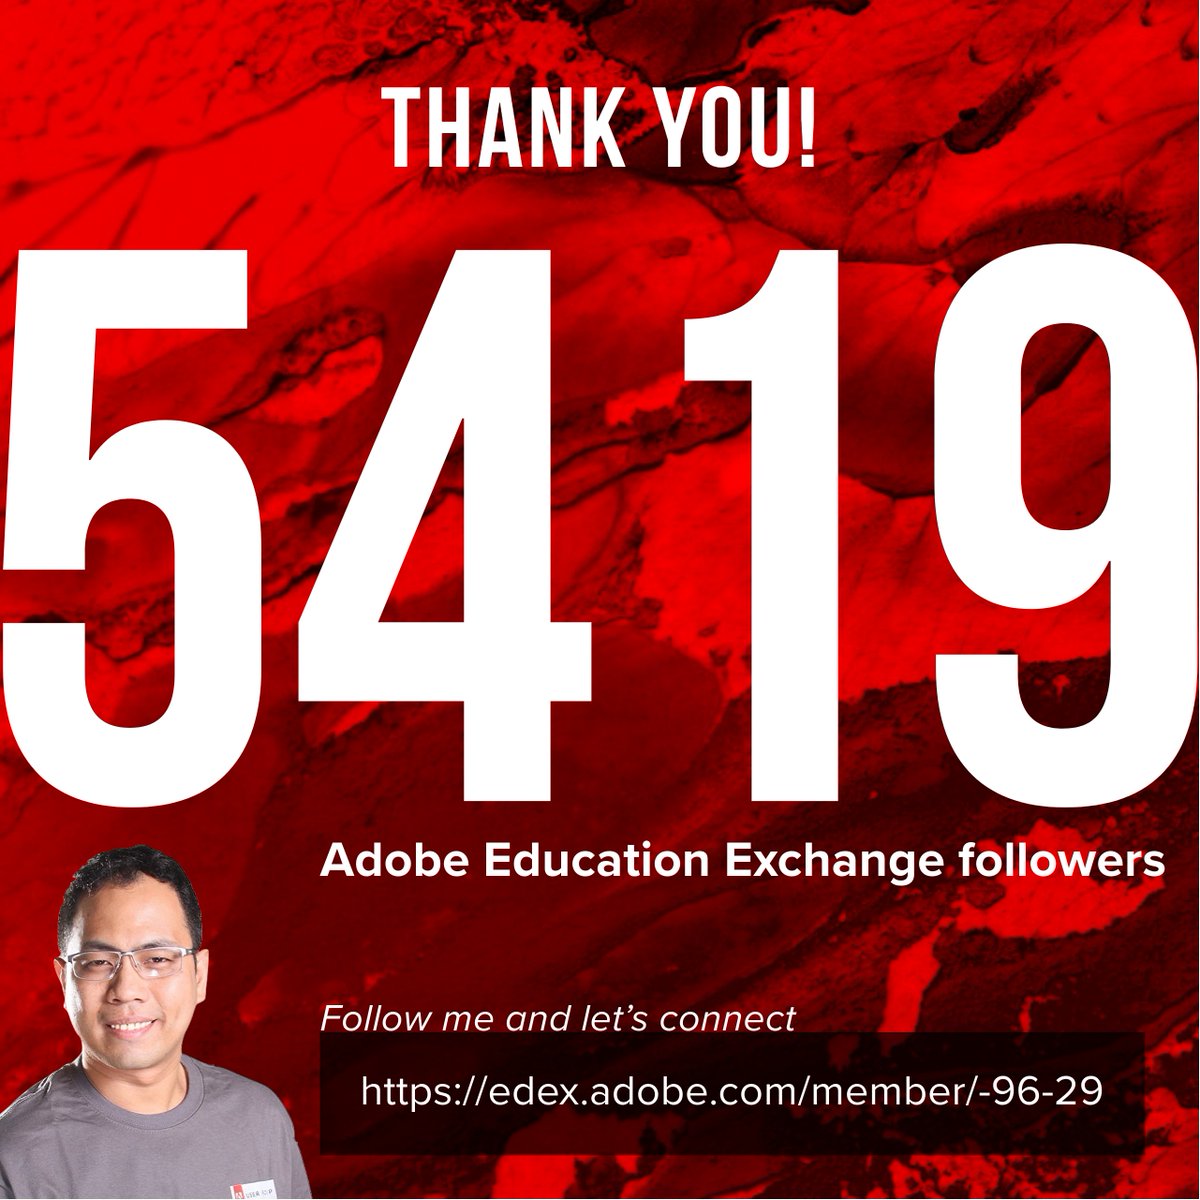 Celebrating small wins!
Thank you to the 5419 followers in Adobe Education Exchange.

Let's start connecting and learning from each other.
Keep on building a better #creativenationph for we are #bettertogether.

Yours truly, #ccevangelistph #fatheraceph #AdobeEduCreative